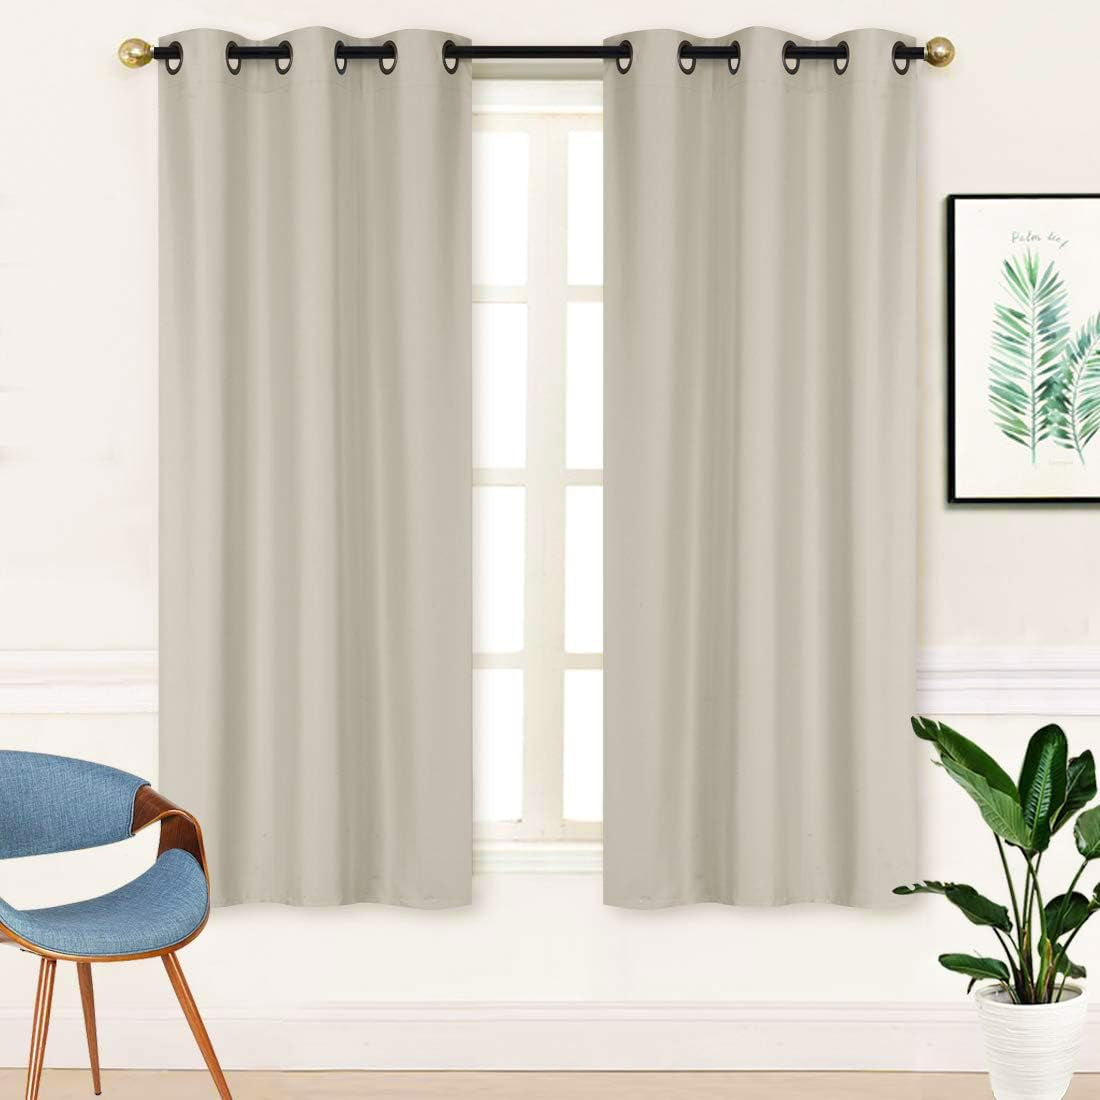 Home Collection 2 Panels 100% Blackout Curtain Set Solid Color with Rod Pocket Grommet Drapes for Kitchen, Dinning Room, Bathroom, Bedroom,Living Room Window New (74” Wide X 62” Long, Ivory)  Kids Zone home Linen Silver 74” Wide X 62” Long 